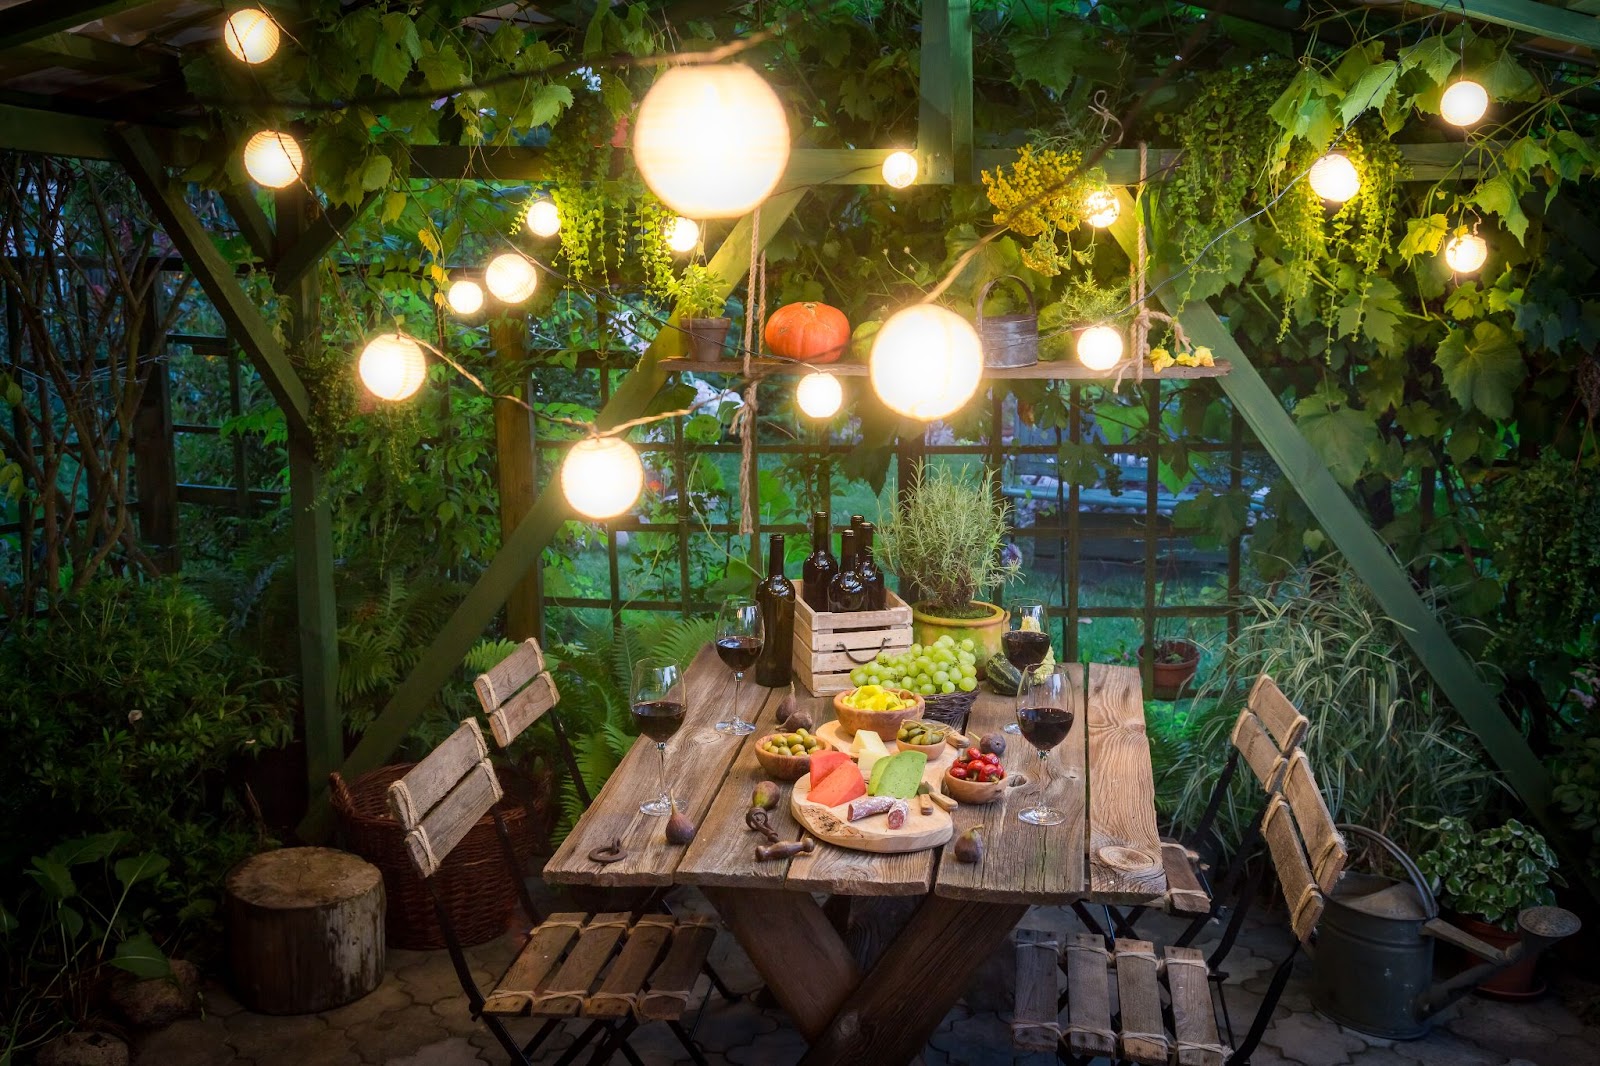 An outdoor wooden dining table is elegantly set for an evening dinner, adorned with a spread of cheeses, fruits, and a glass of red wine, creating a charming atmosphere for outdoor dining.